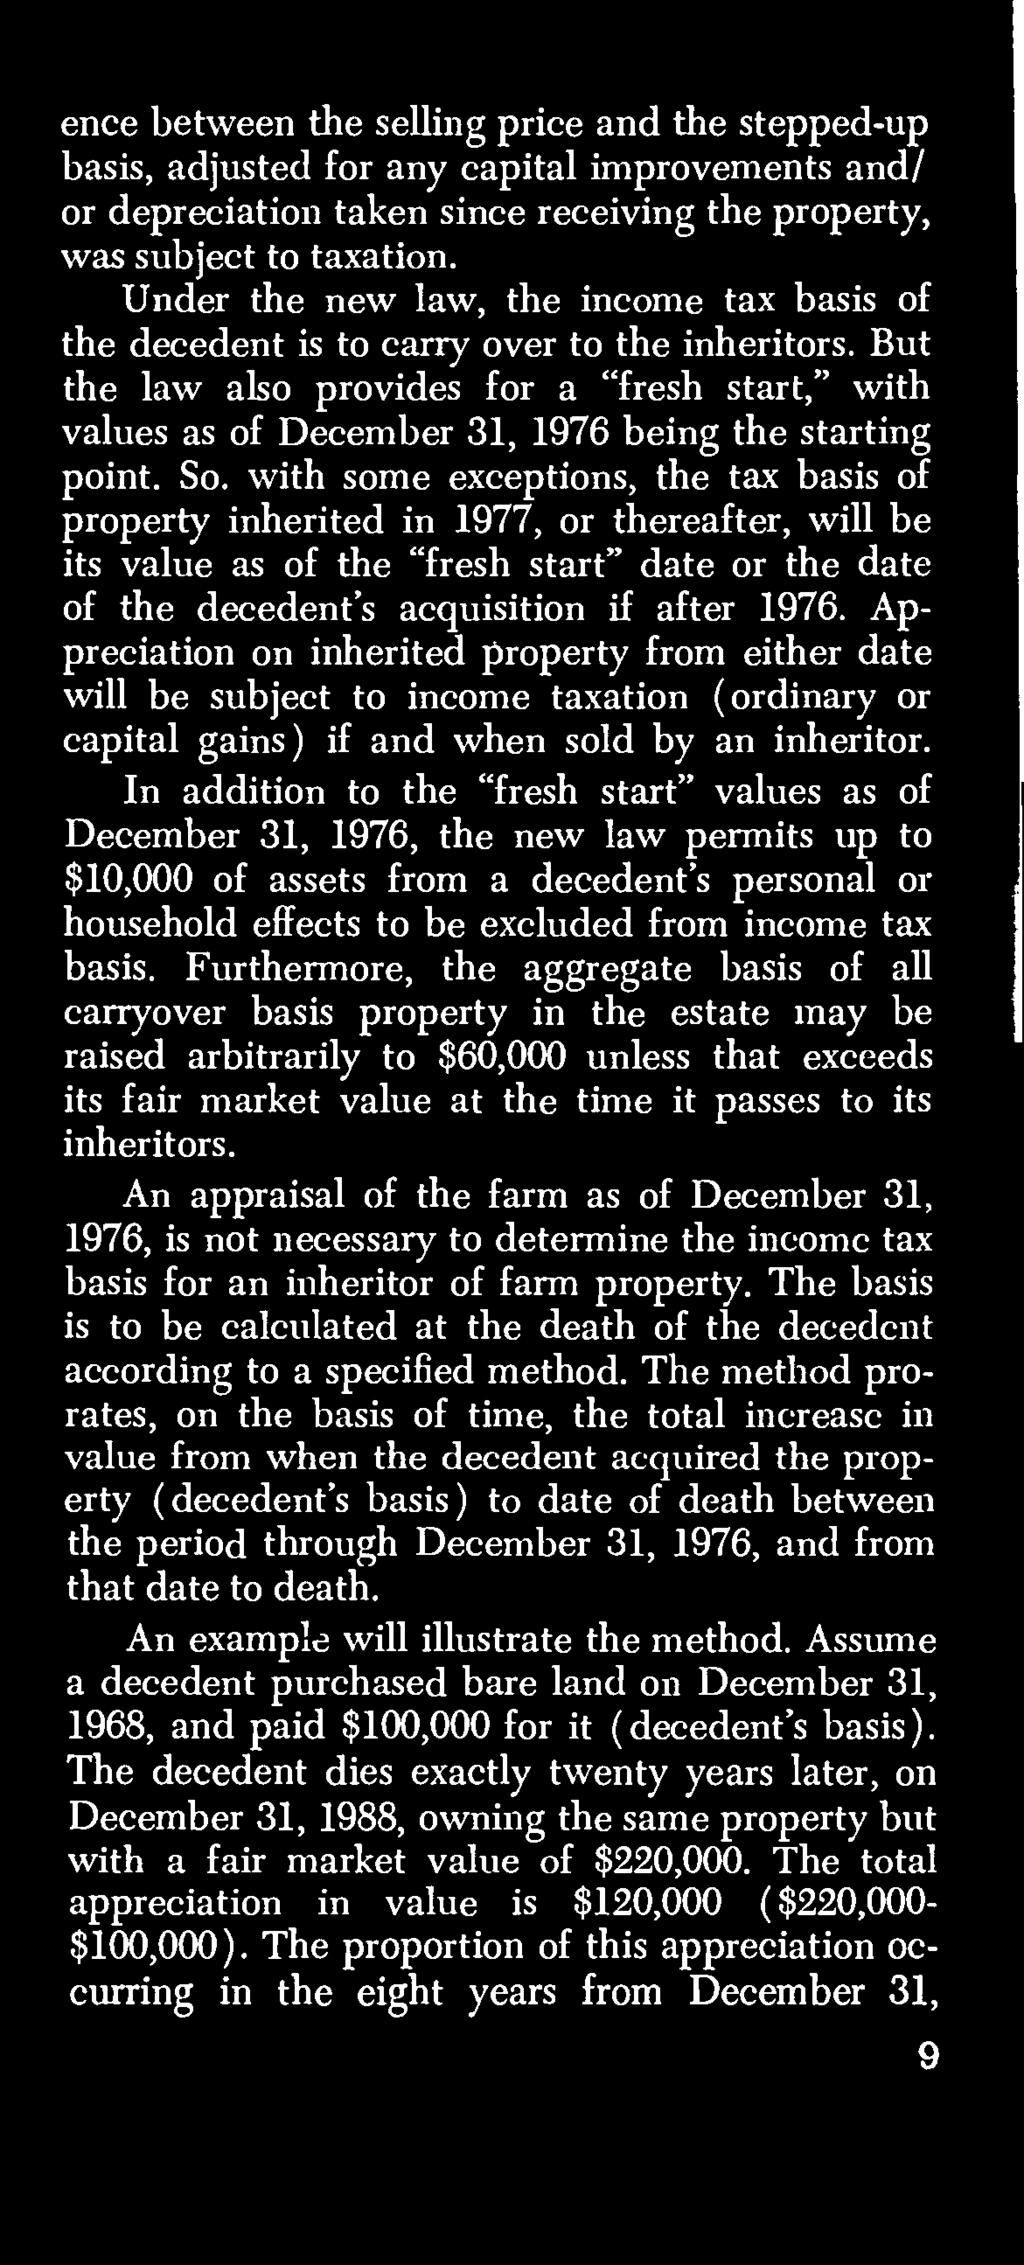 In addition to the "fresh start" values as of December 31, 1976, the new law permits up to $10,000 of assets from a decedent's personal or household effects to be excluded from income tax basis.